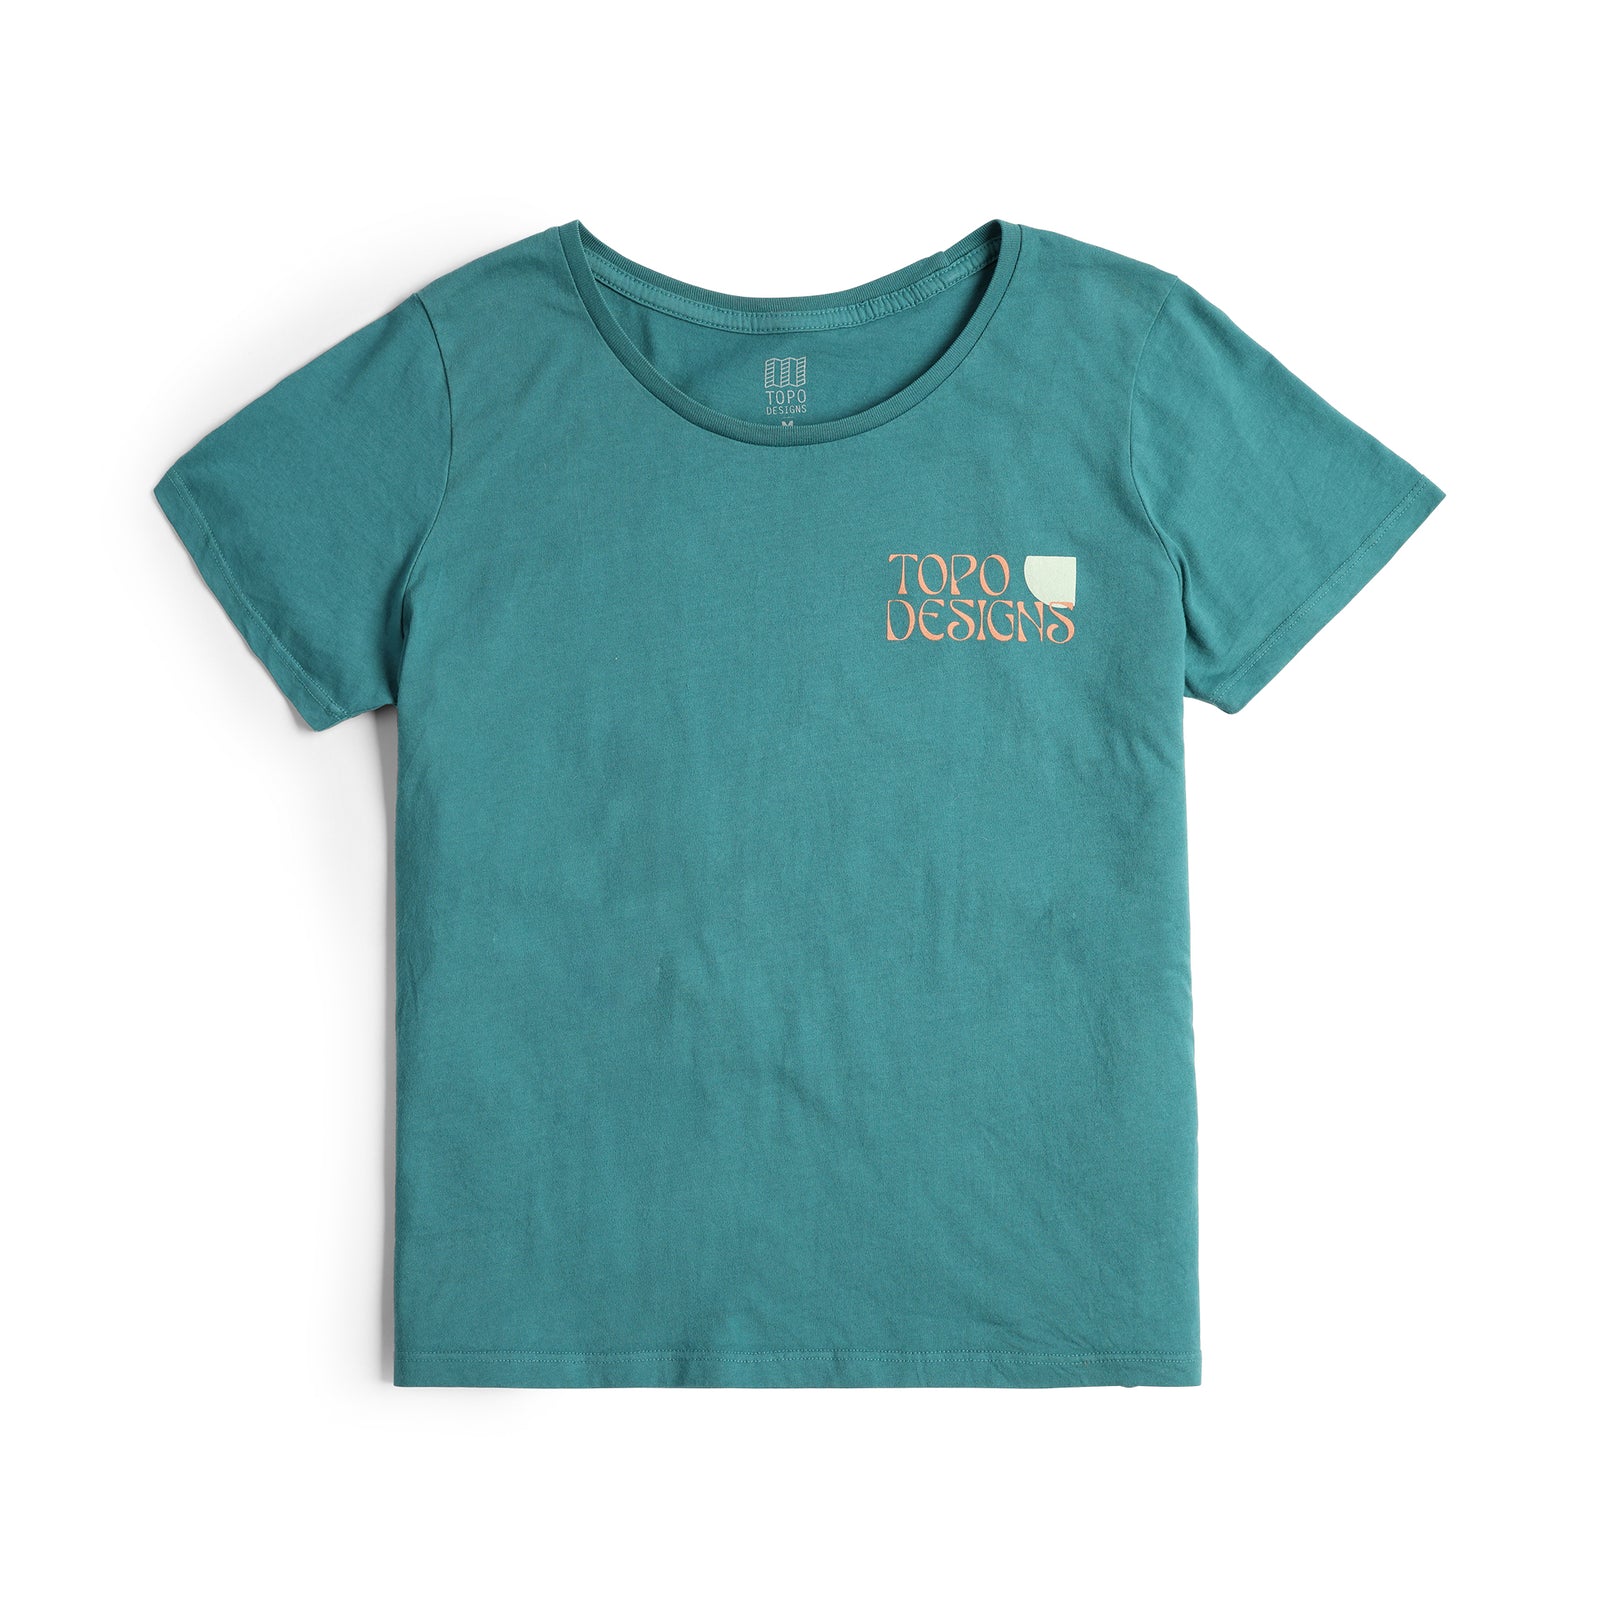 Front view of Topo Designs Women's Canyons Tee 100% organic cotton short sleeve graphic logo t-shirt in "caribbean" blue.